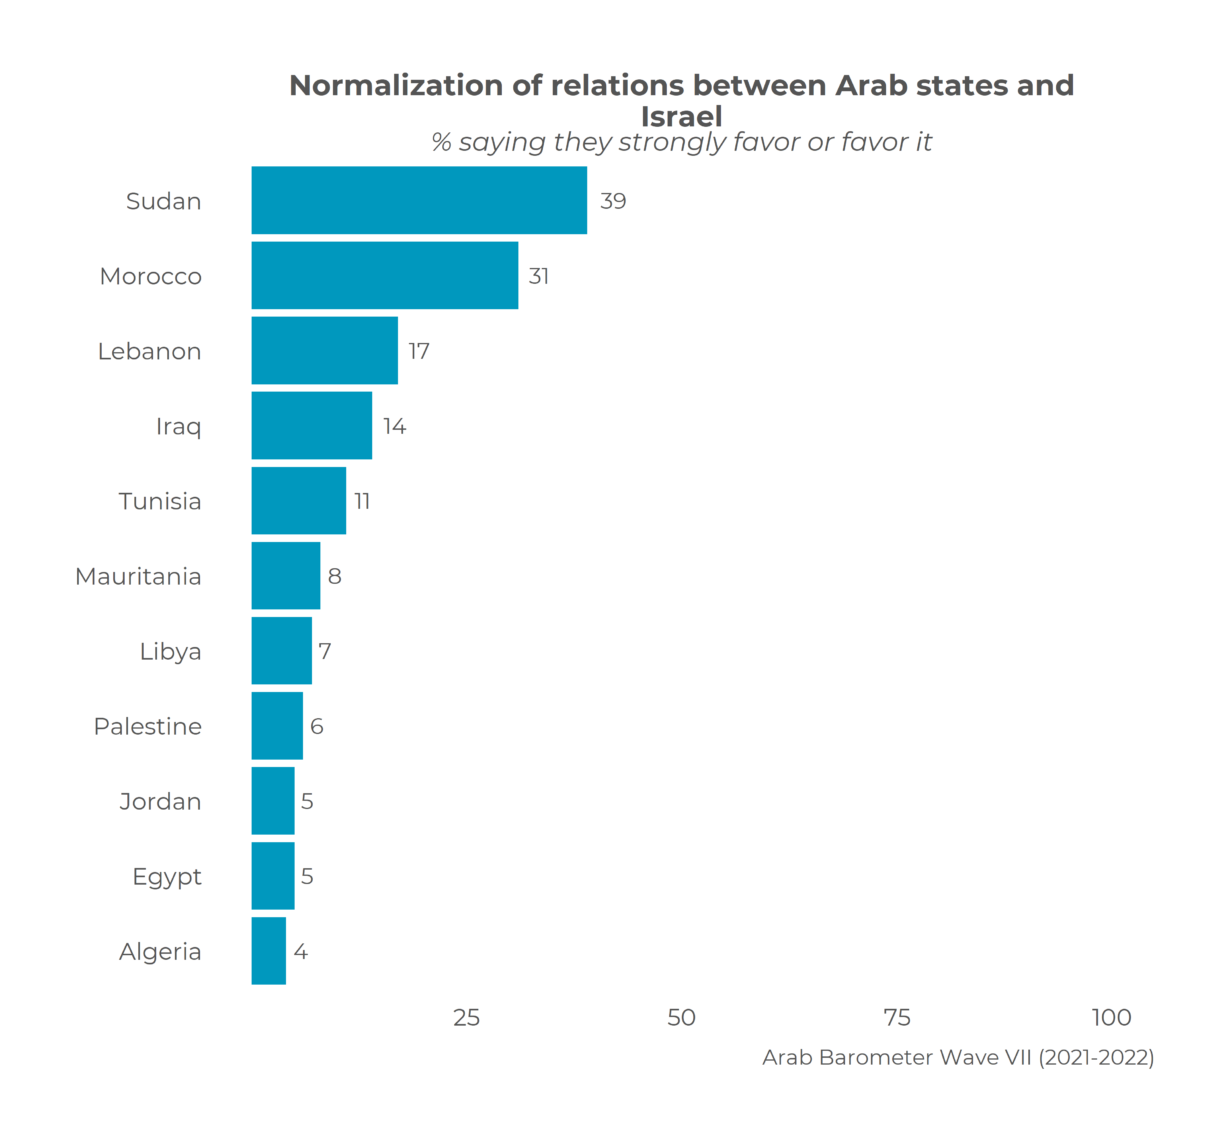 How Do MENA Citizens View Normalization With Israel?